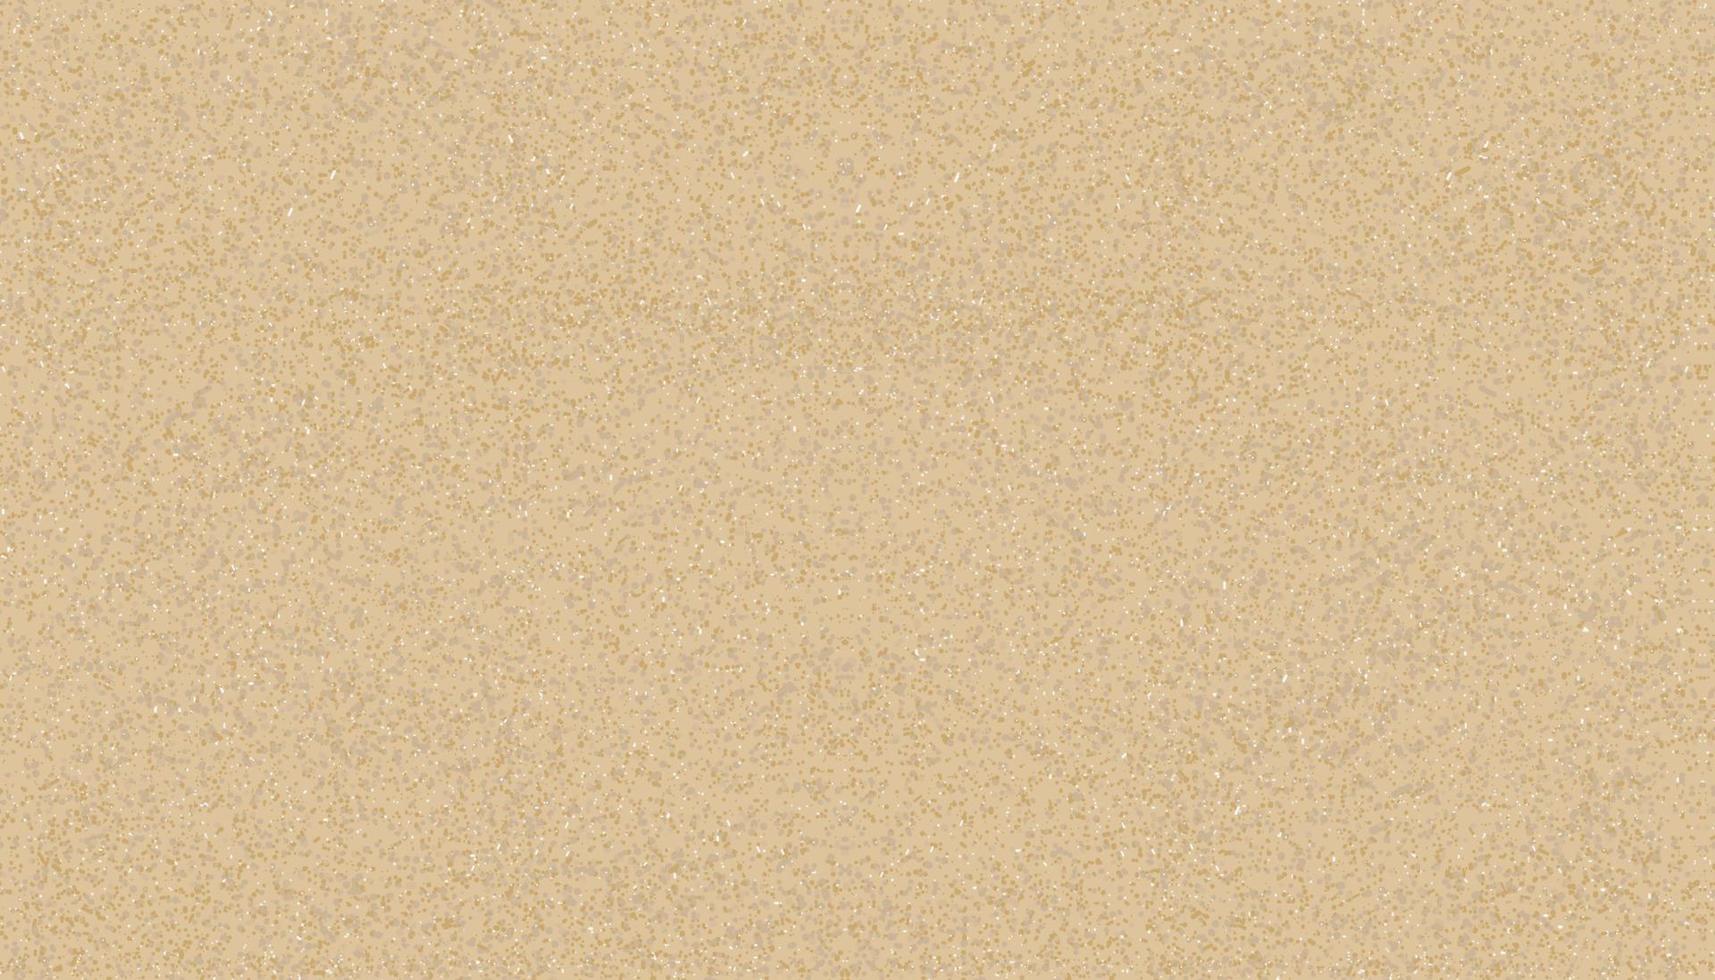 Seamless Sandy Beach for background.Vector illustration Pattern Sand Texture,Backdrop Endless Brown Beach sand dune for Summer banner background. vector